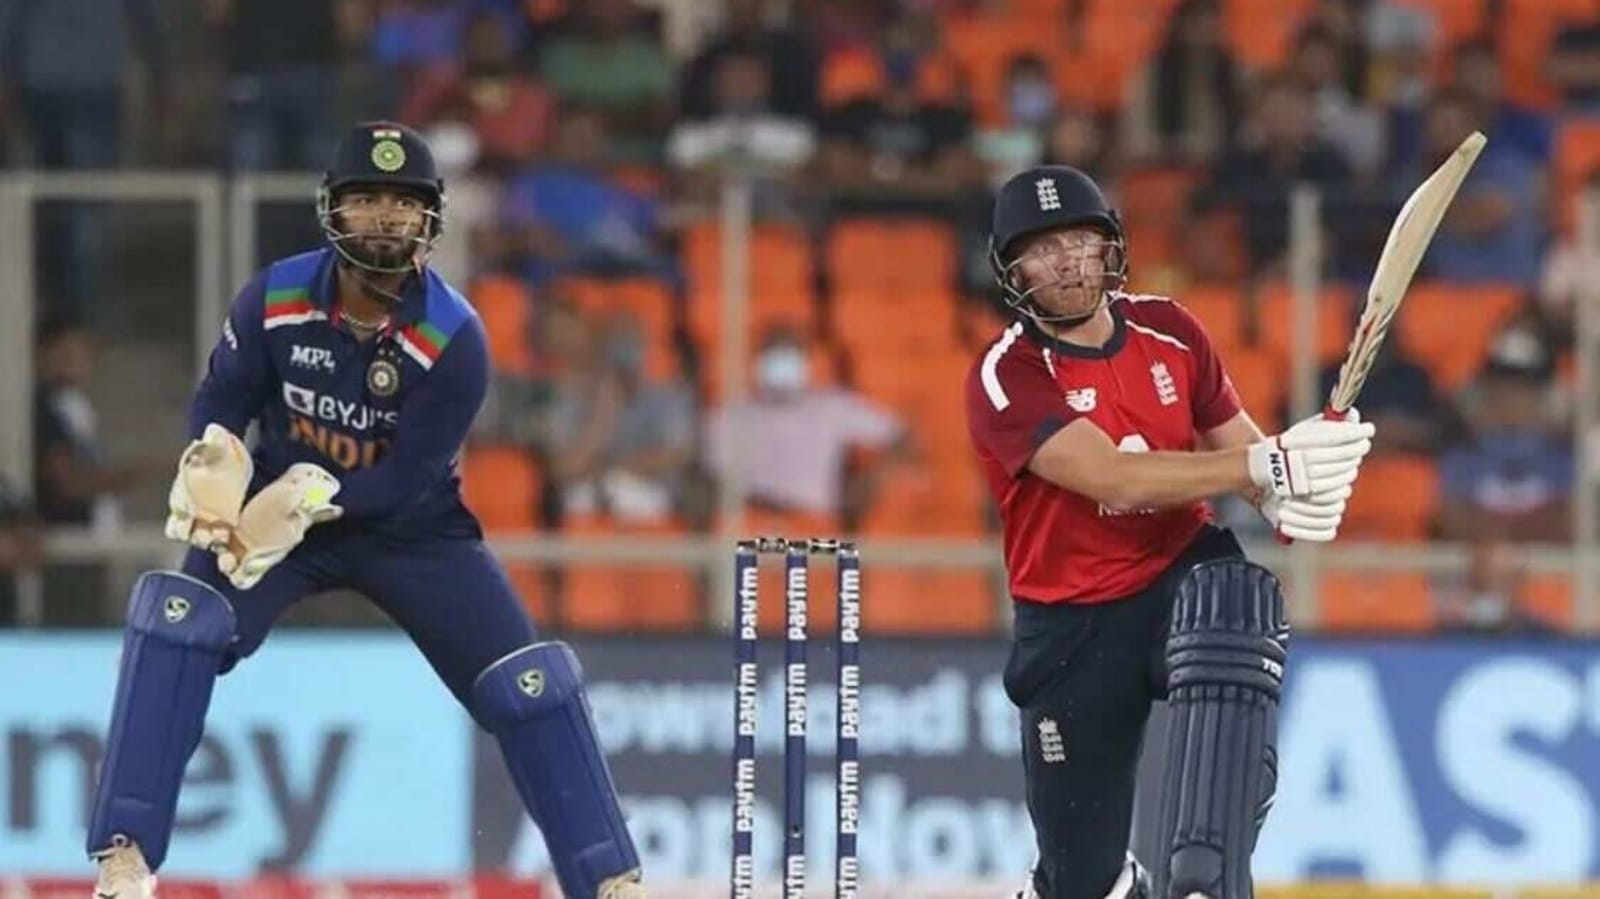 India vs England Highlights 1st T20 Iyers fifty goes in vain as England win by 8 wickets Hindustan Times